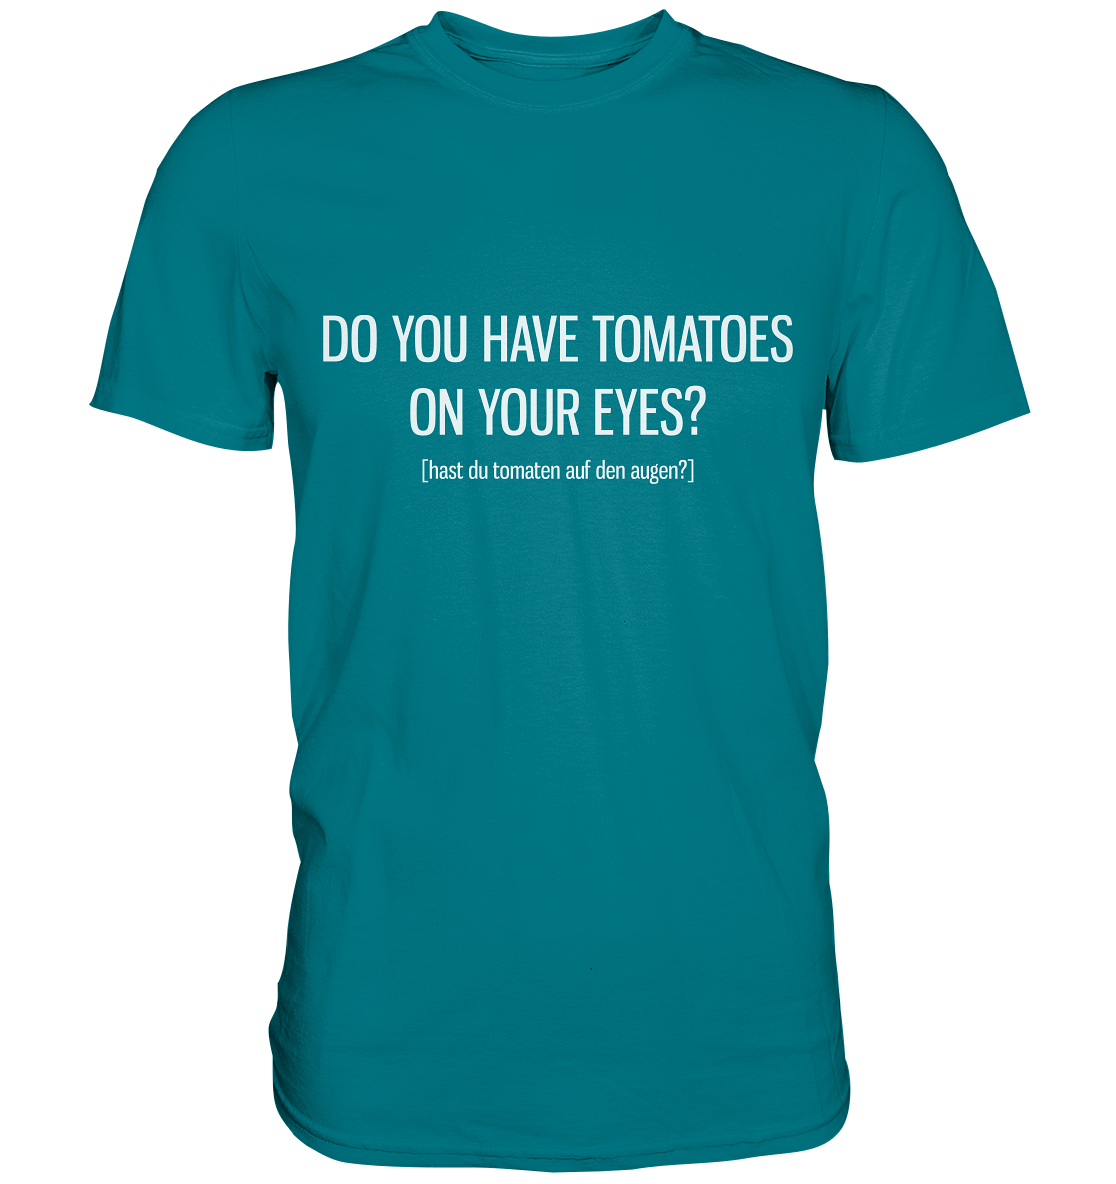 Do you have tomatoes on your eyes? Englisch - Unisex Premium Shirt